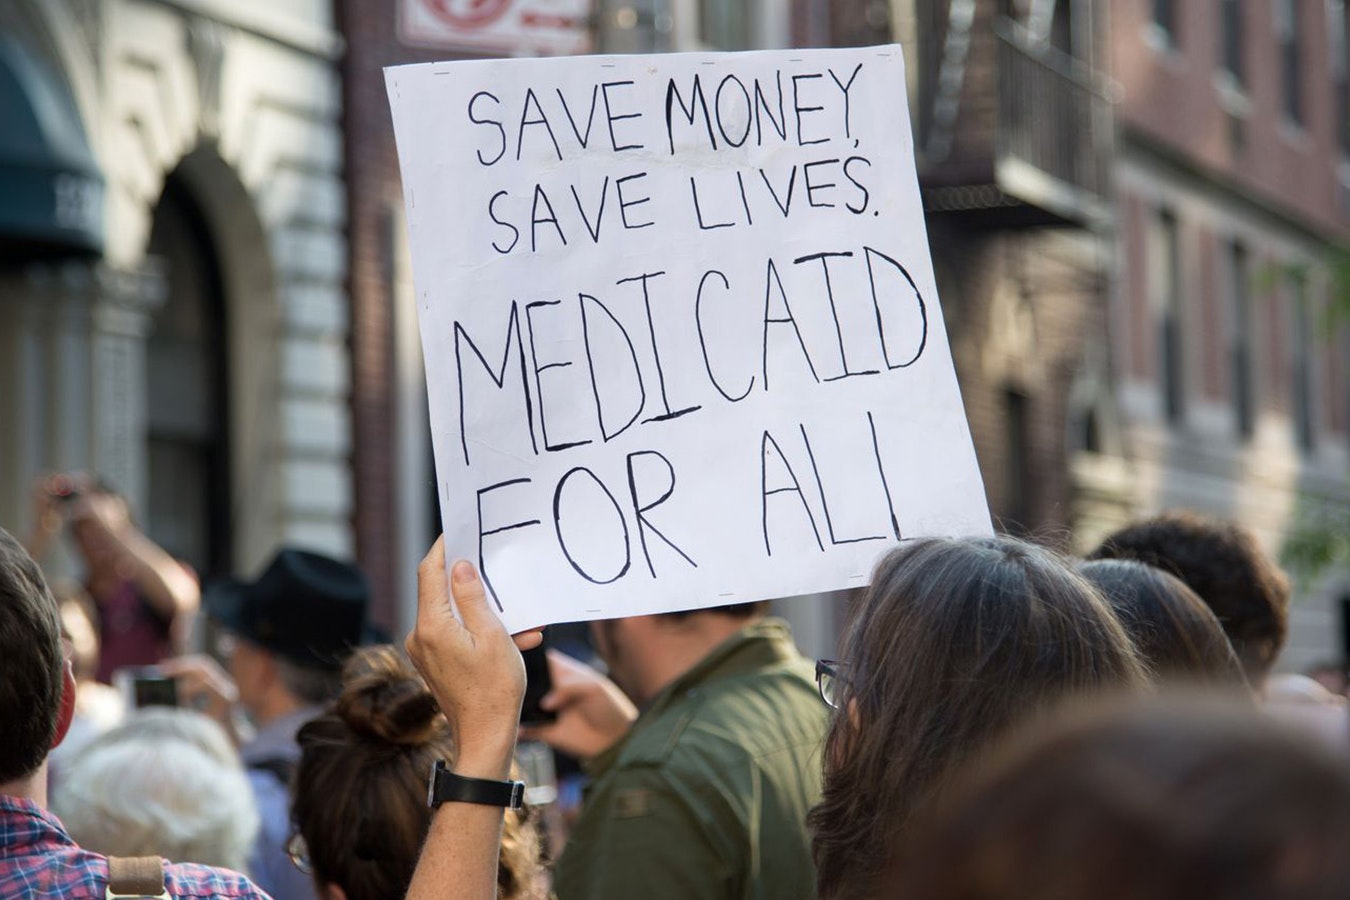 A rally in support of Medicaid expansion in New York in this file photo. Wyoming legislators have repeatedly rejected Medicaid expansion.